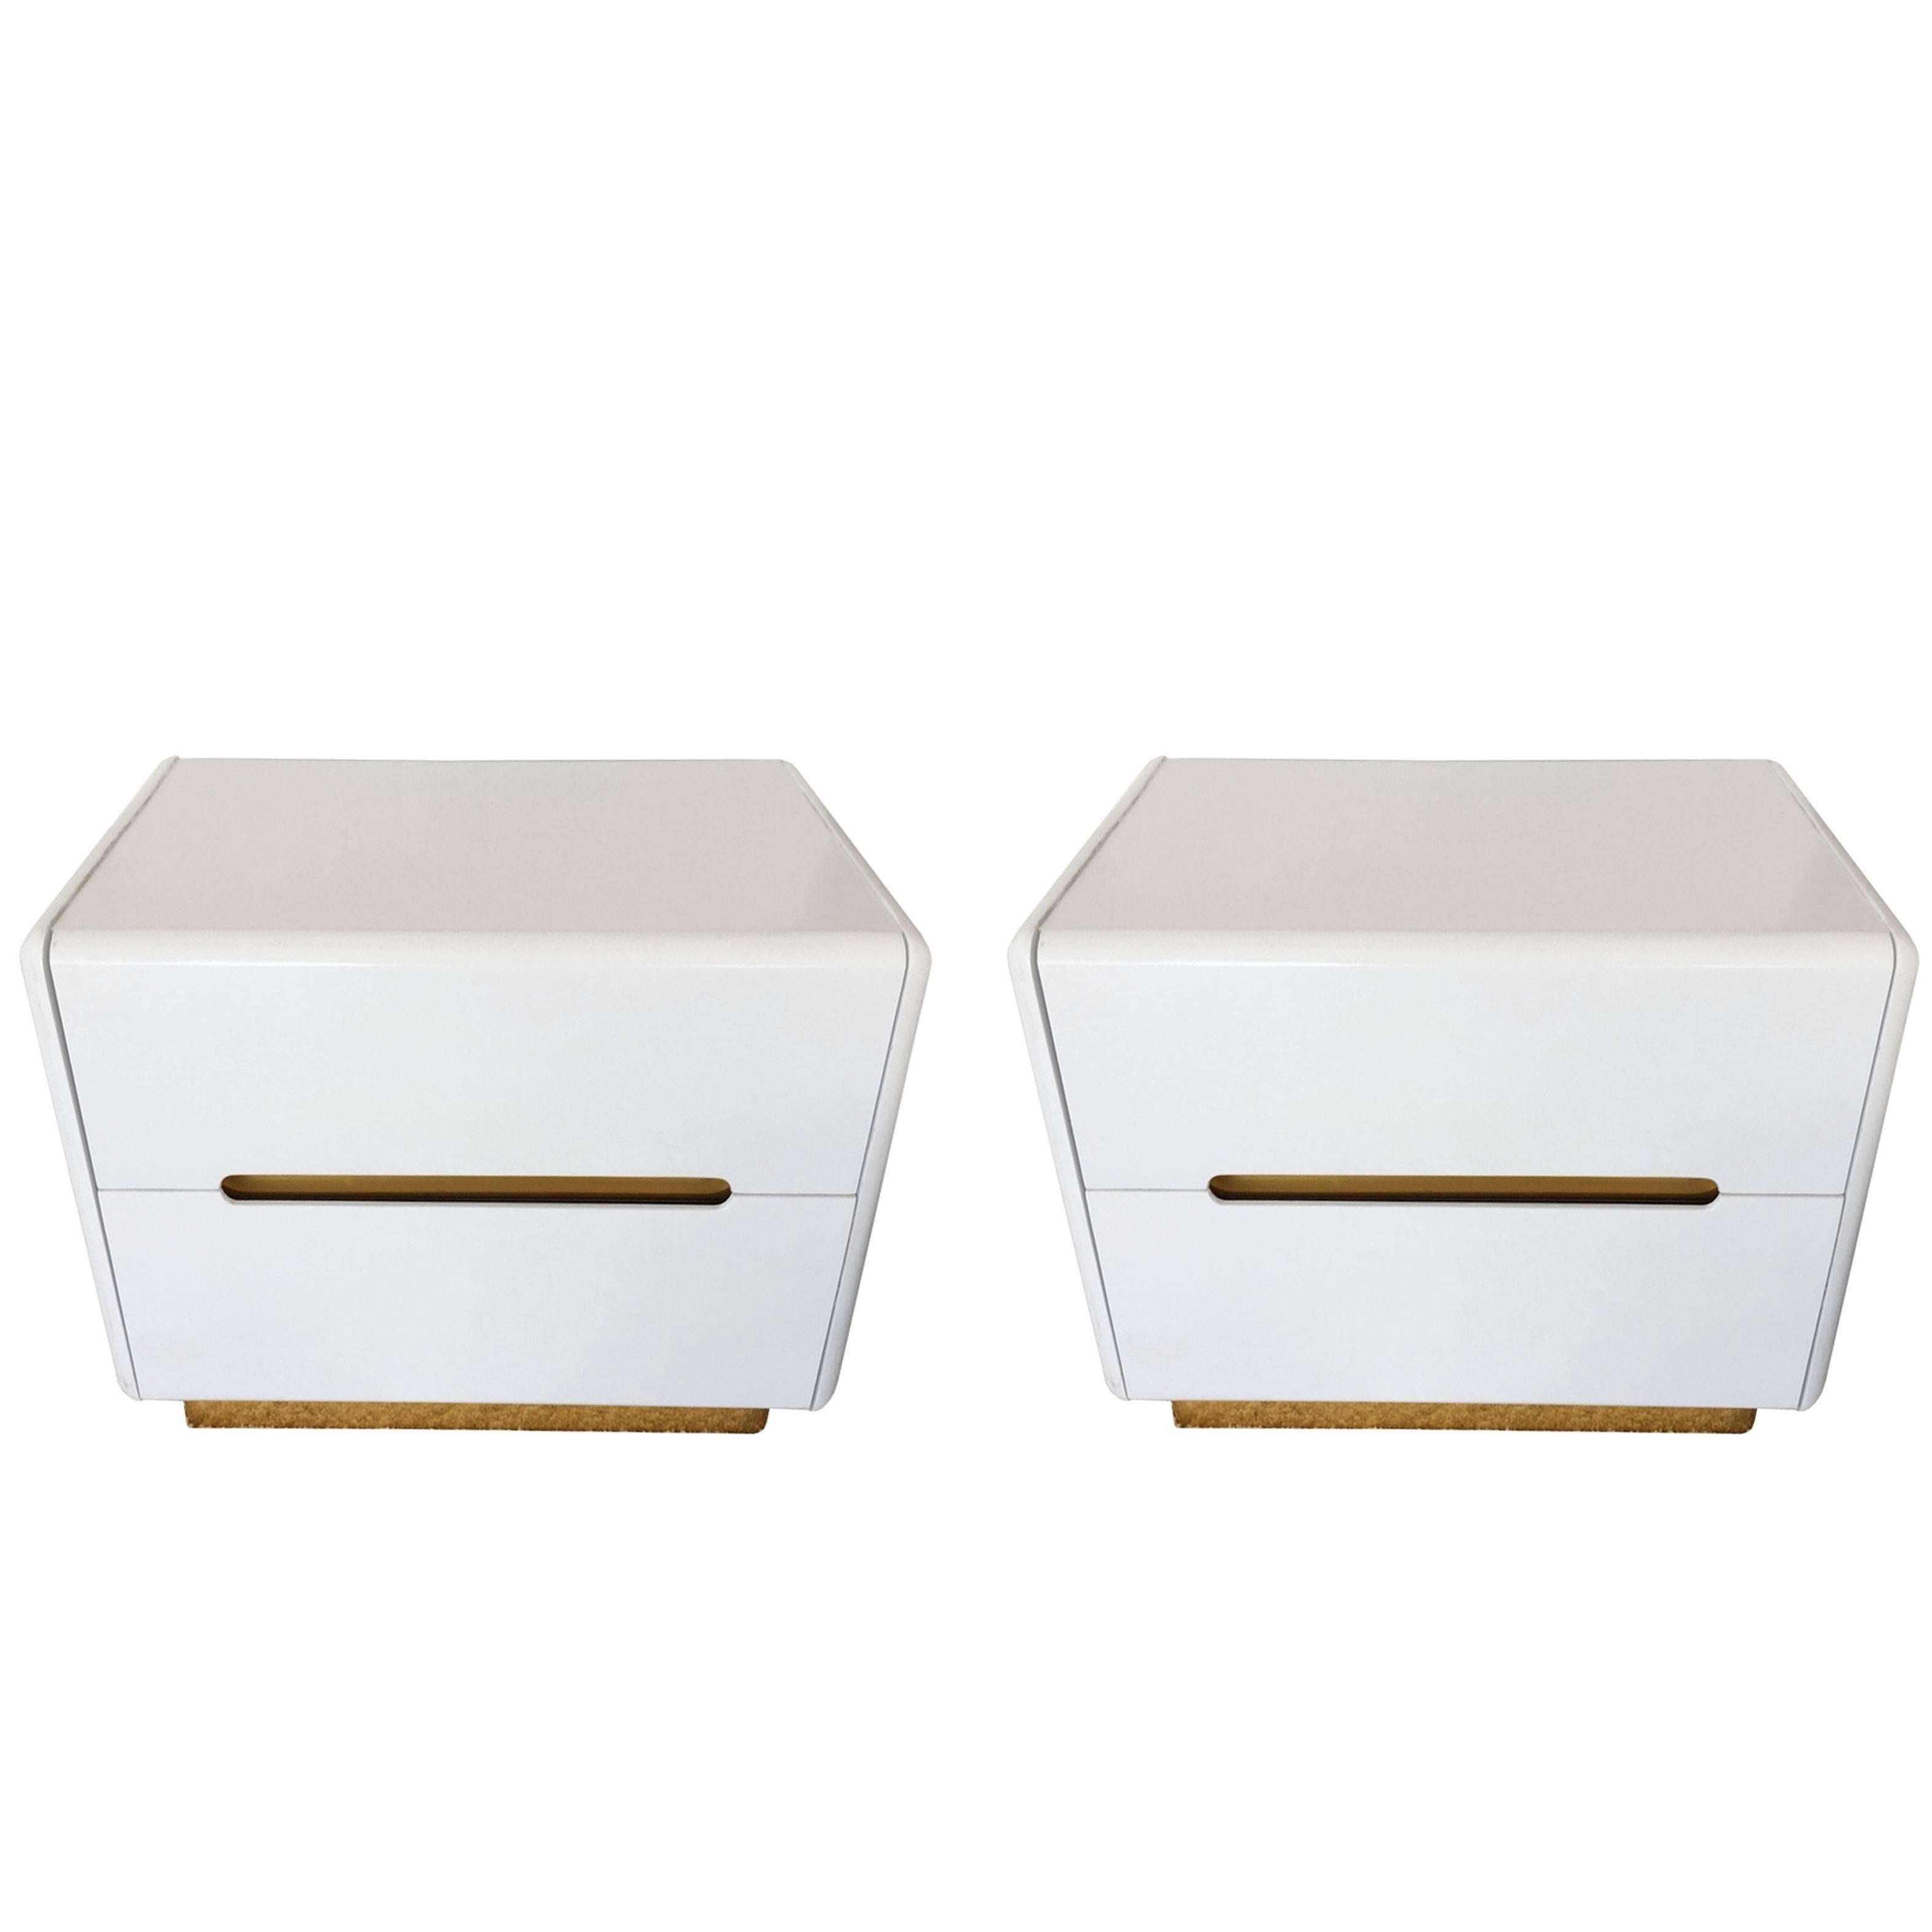 Pair of Vintage Lane Nightstands in White Lacquer and Brass